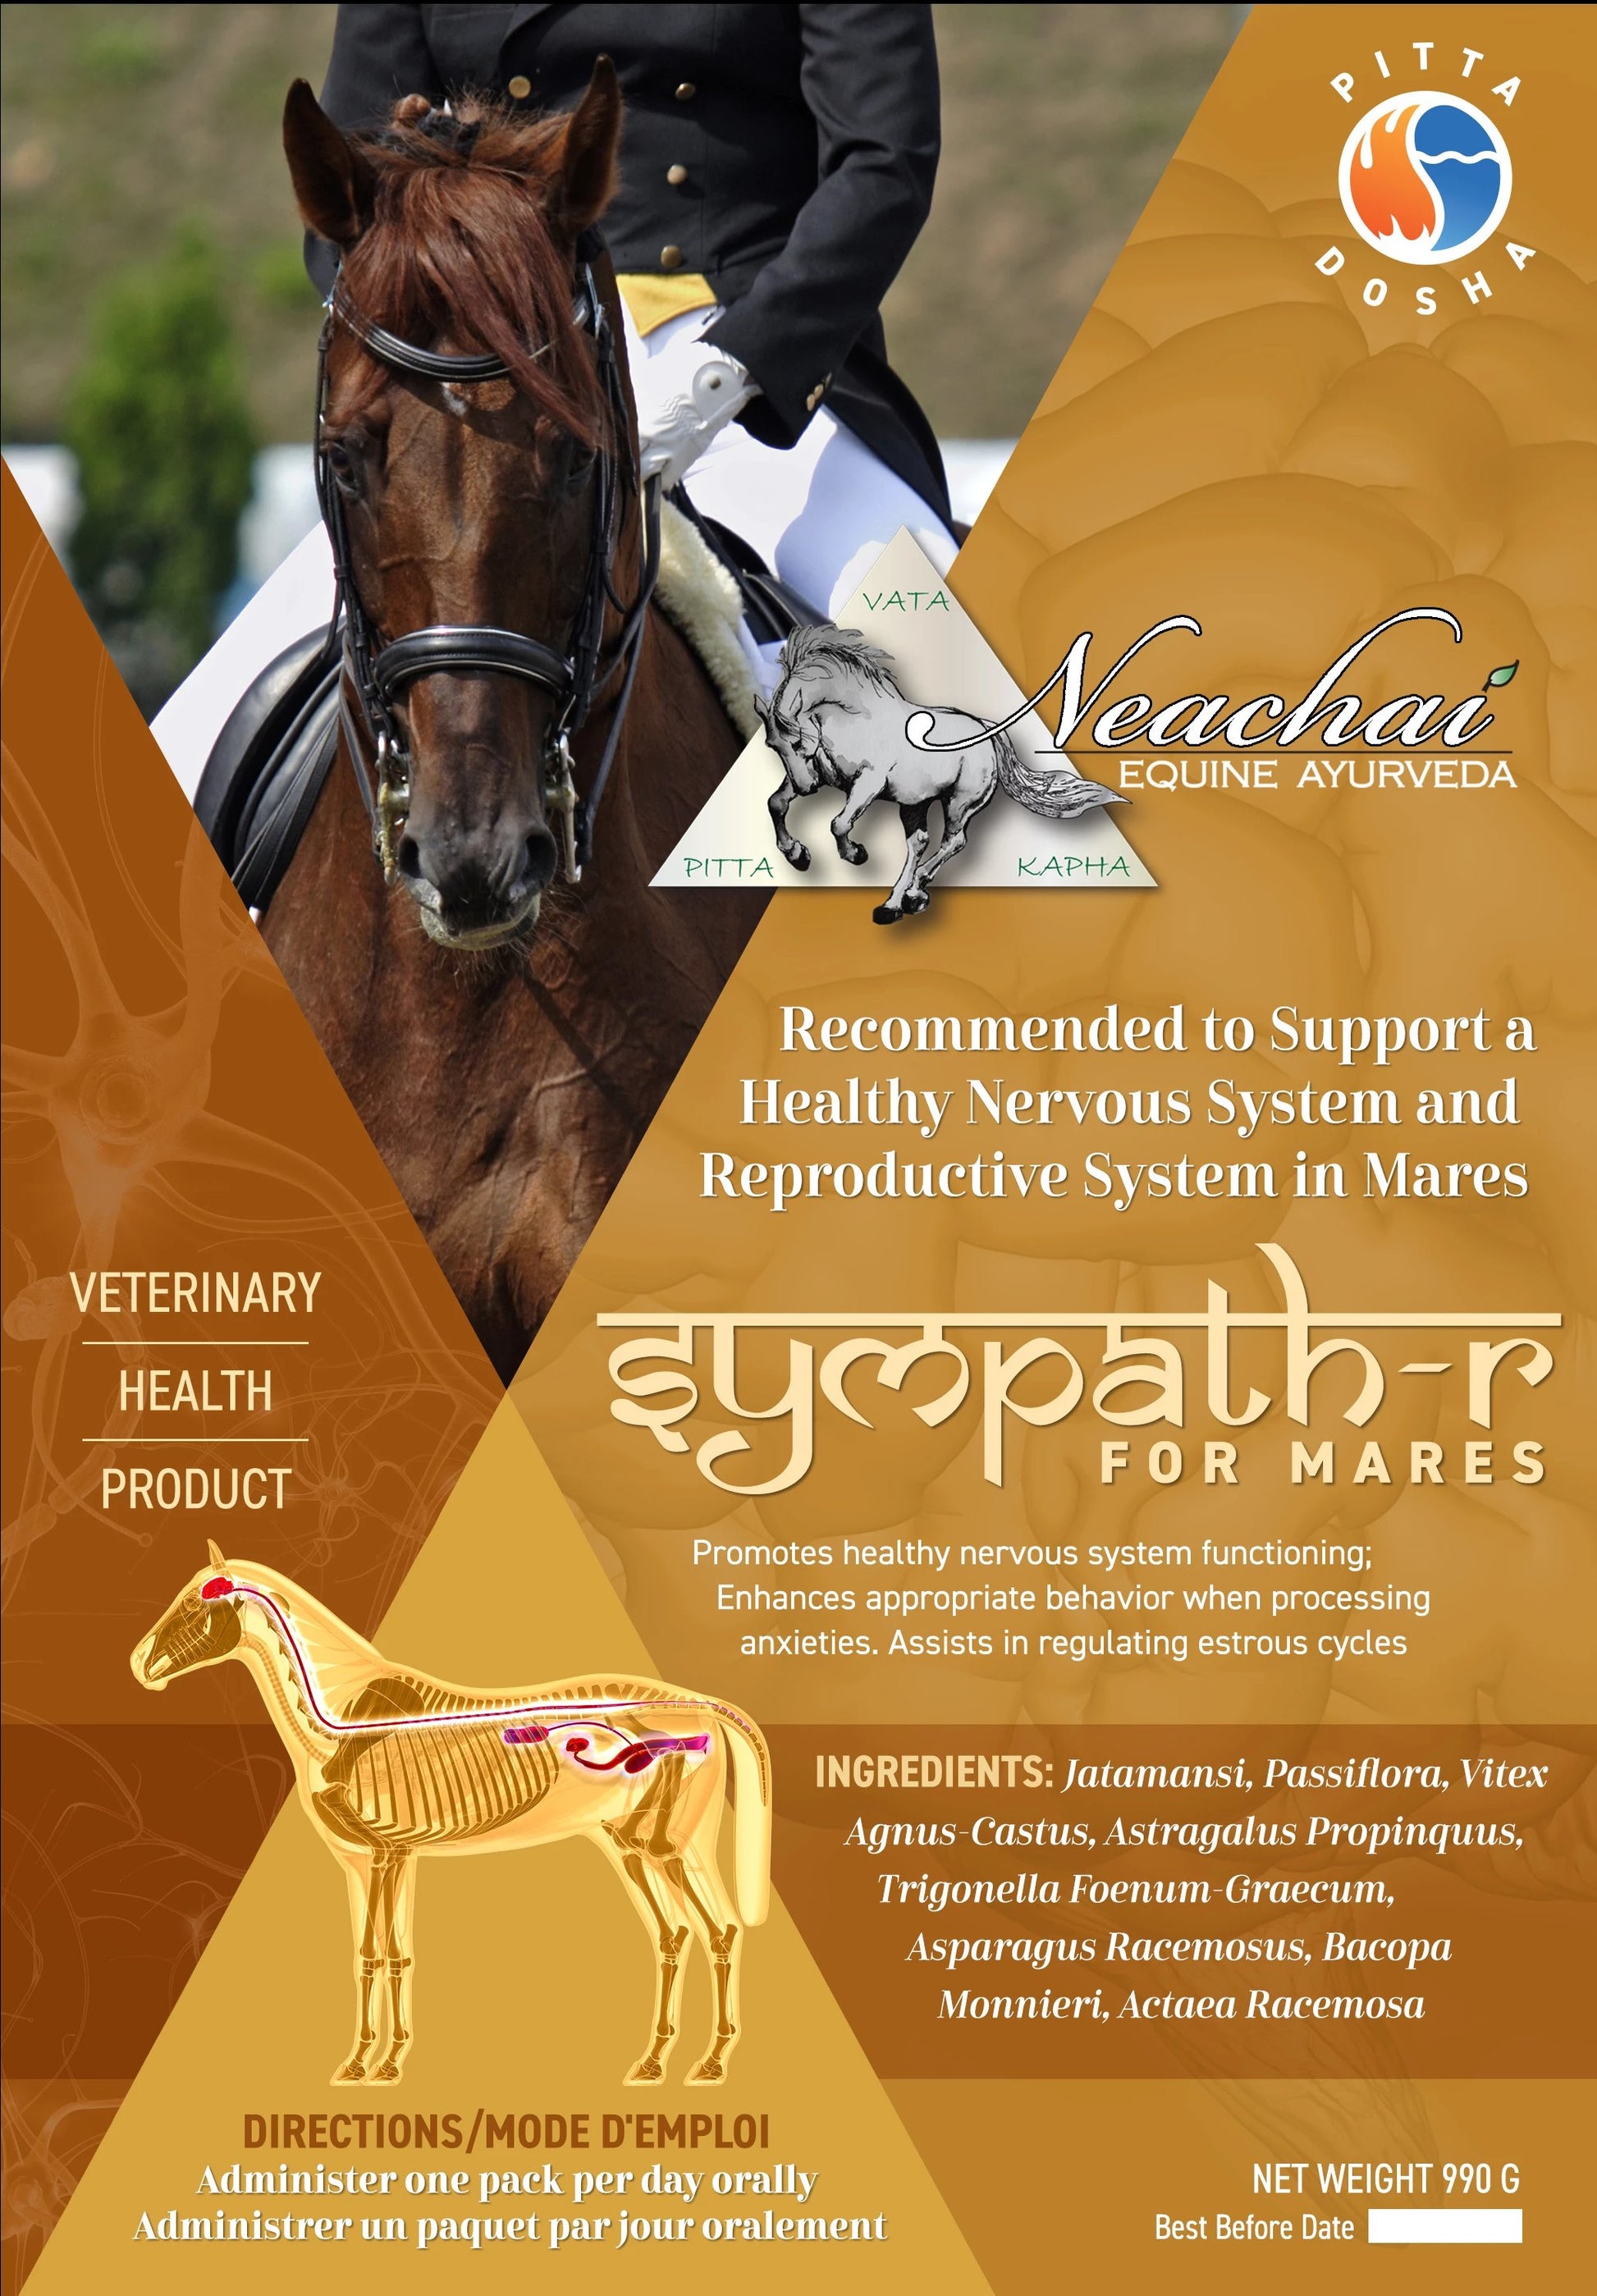 Sympath-R for Mares Herbal Supplement Neachai - Equestrian Fashion Outfitters